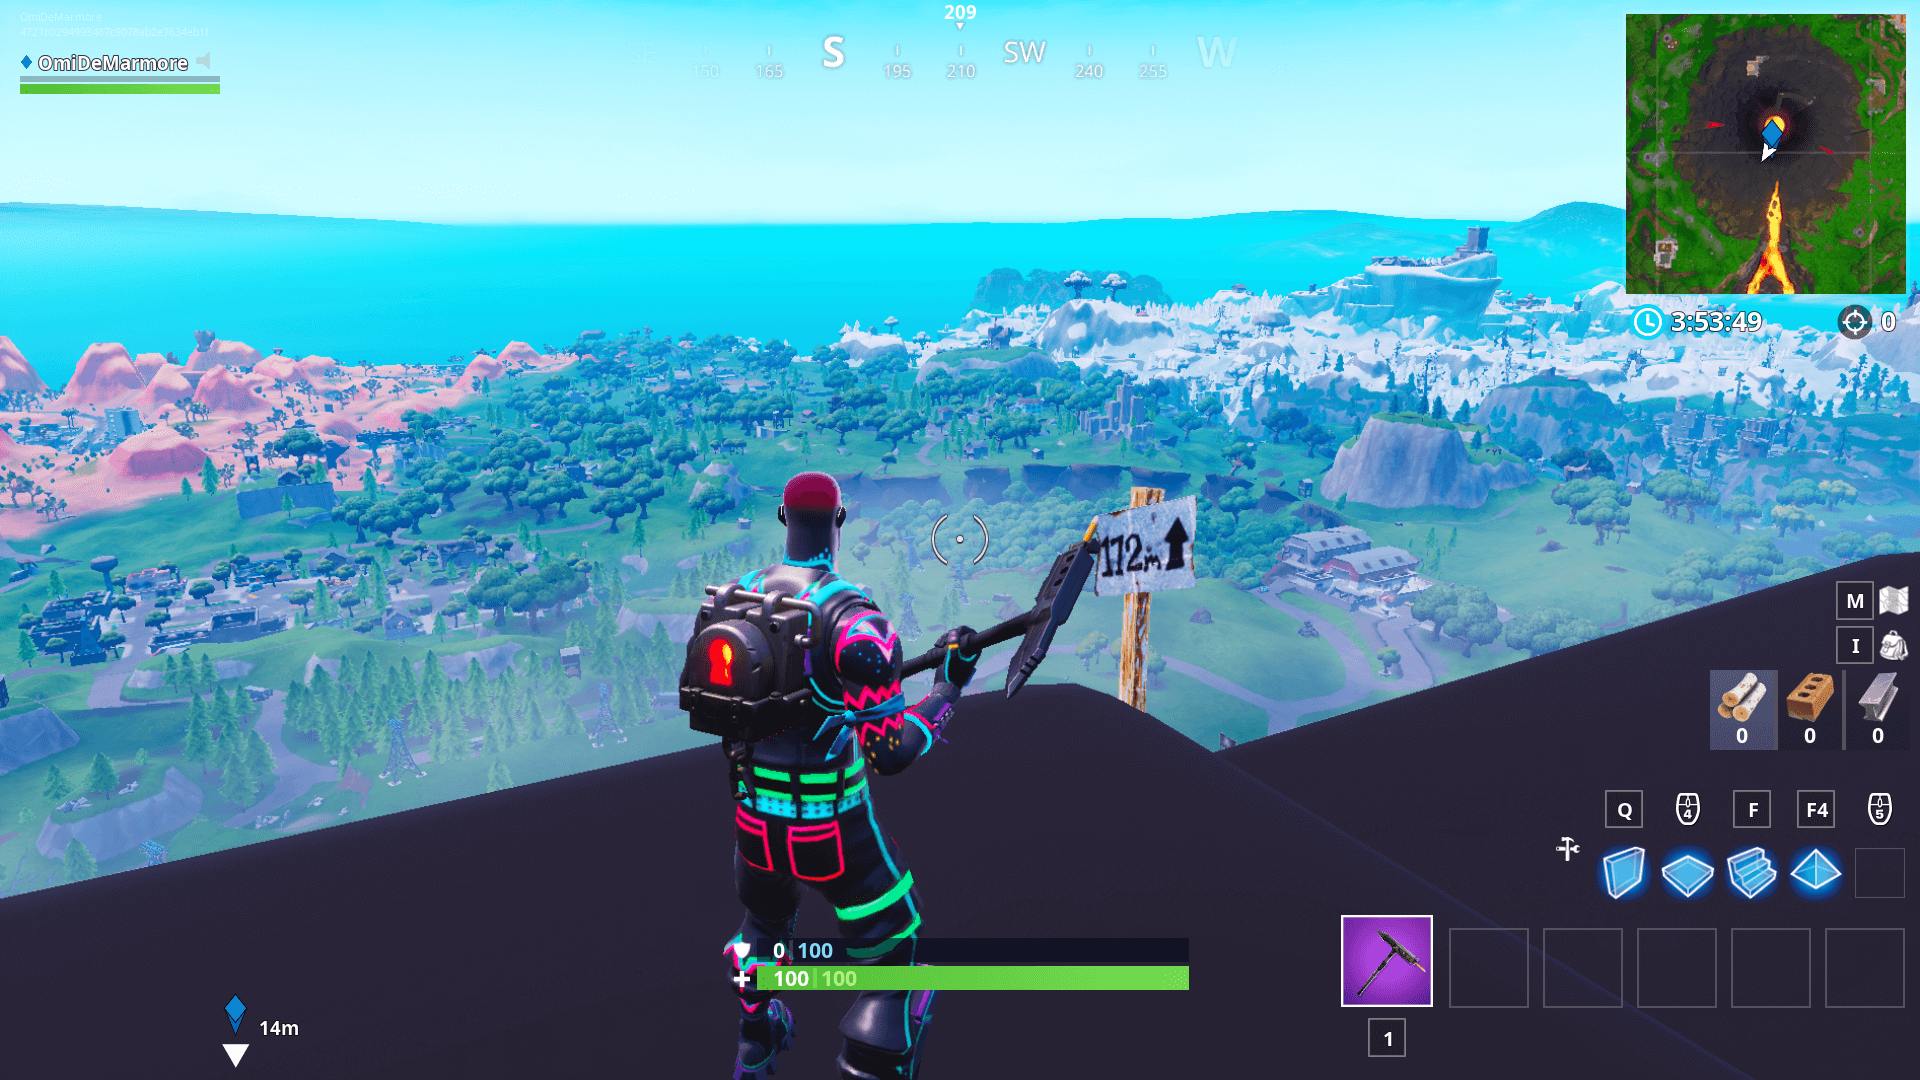 What Are The 5 Highest Elevation On Fortnite Fortnite Location Of The 5 Highest Elevations On The Island Season 8 Dot Esports